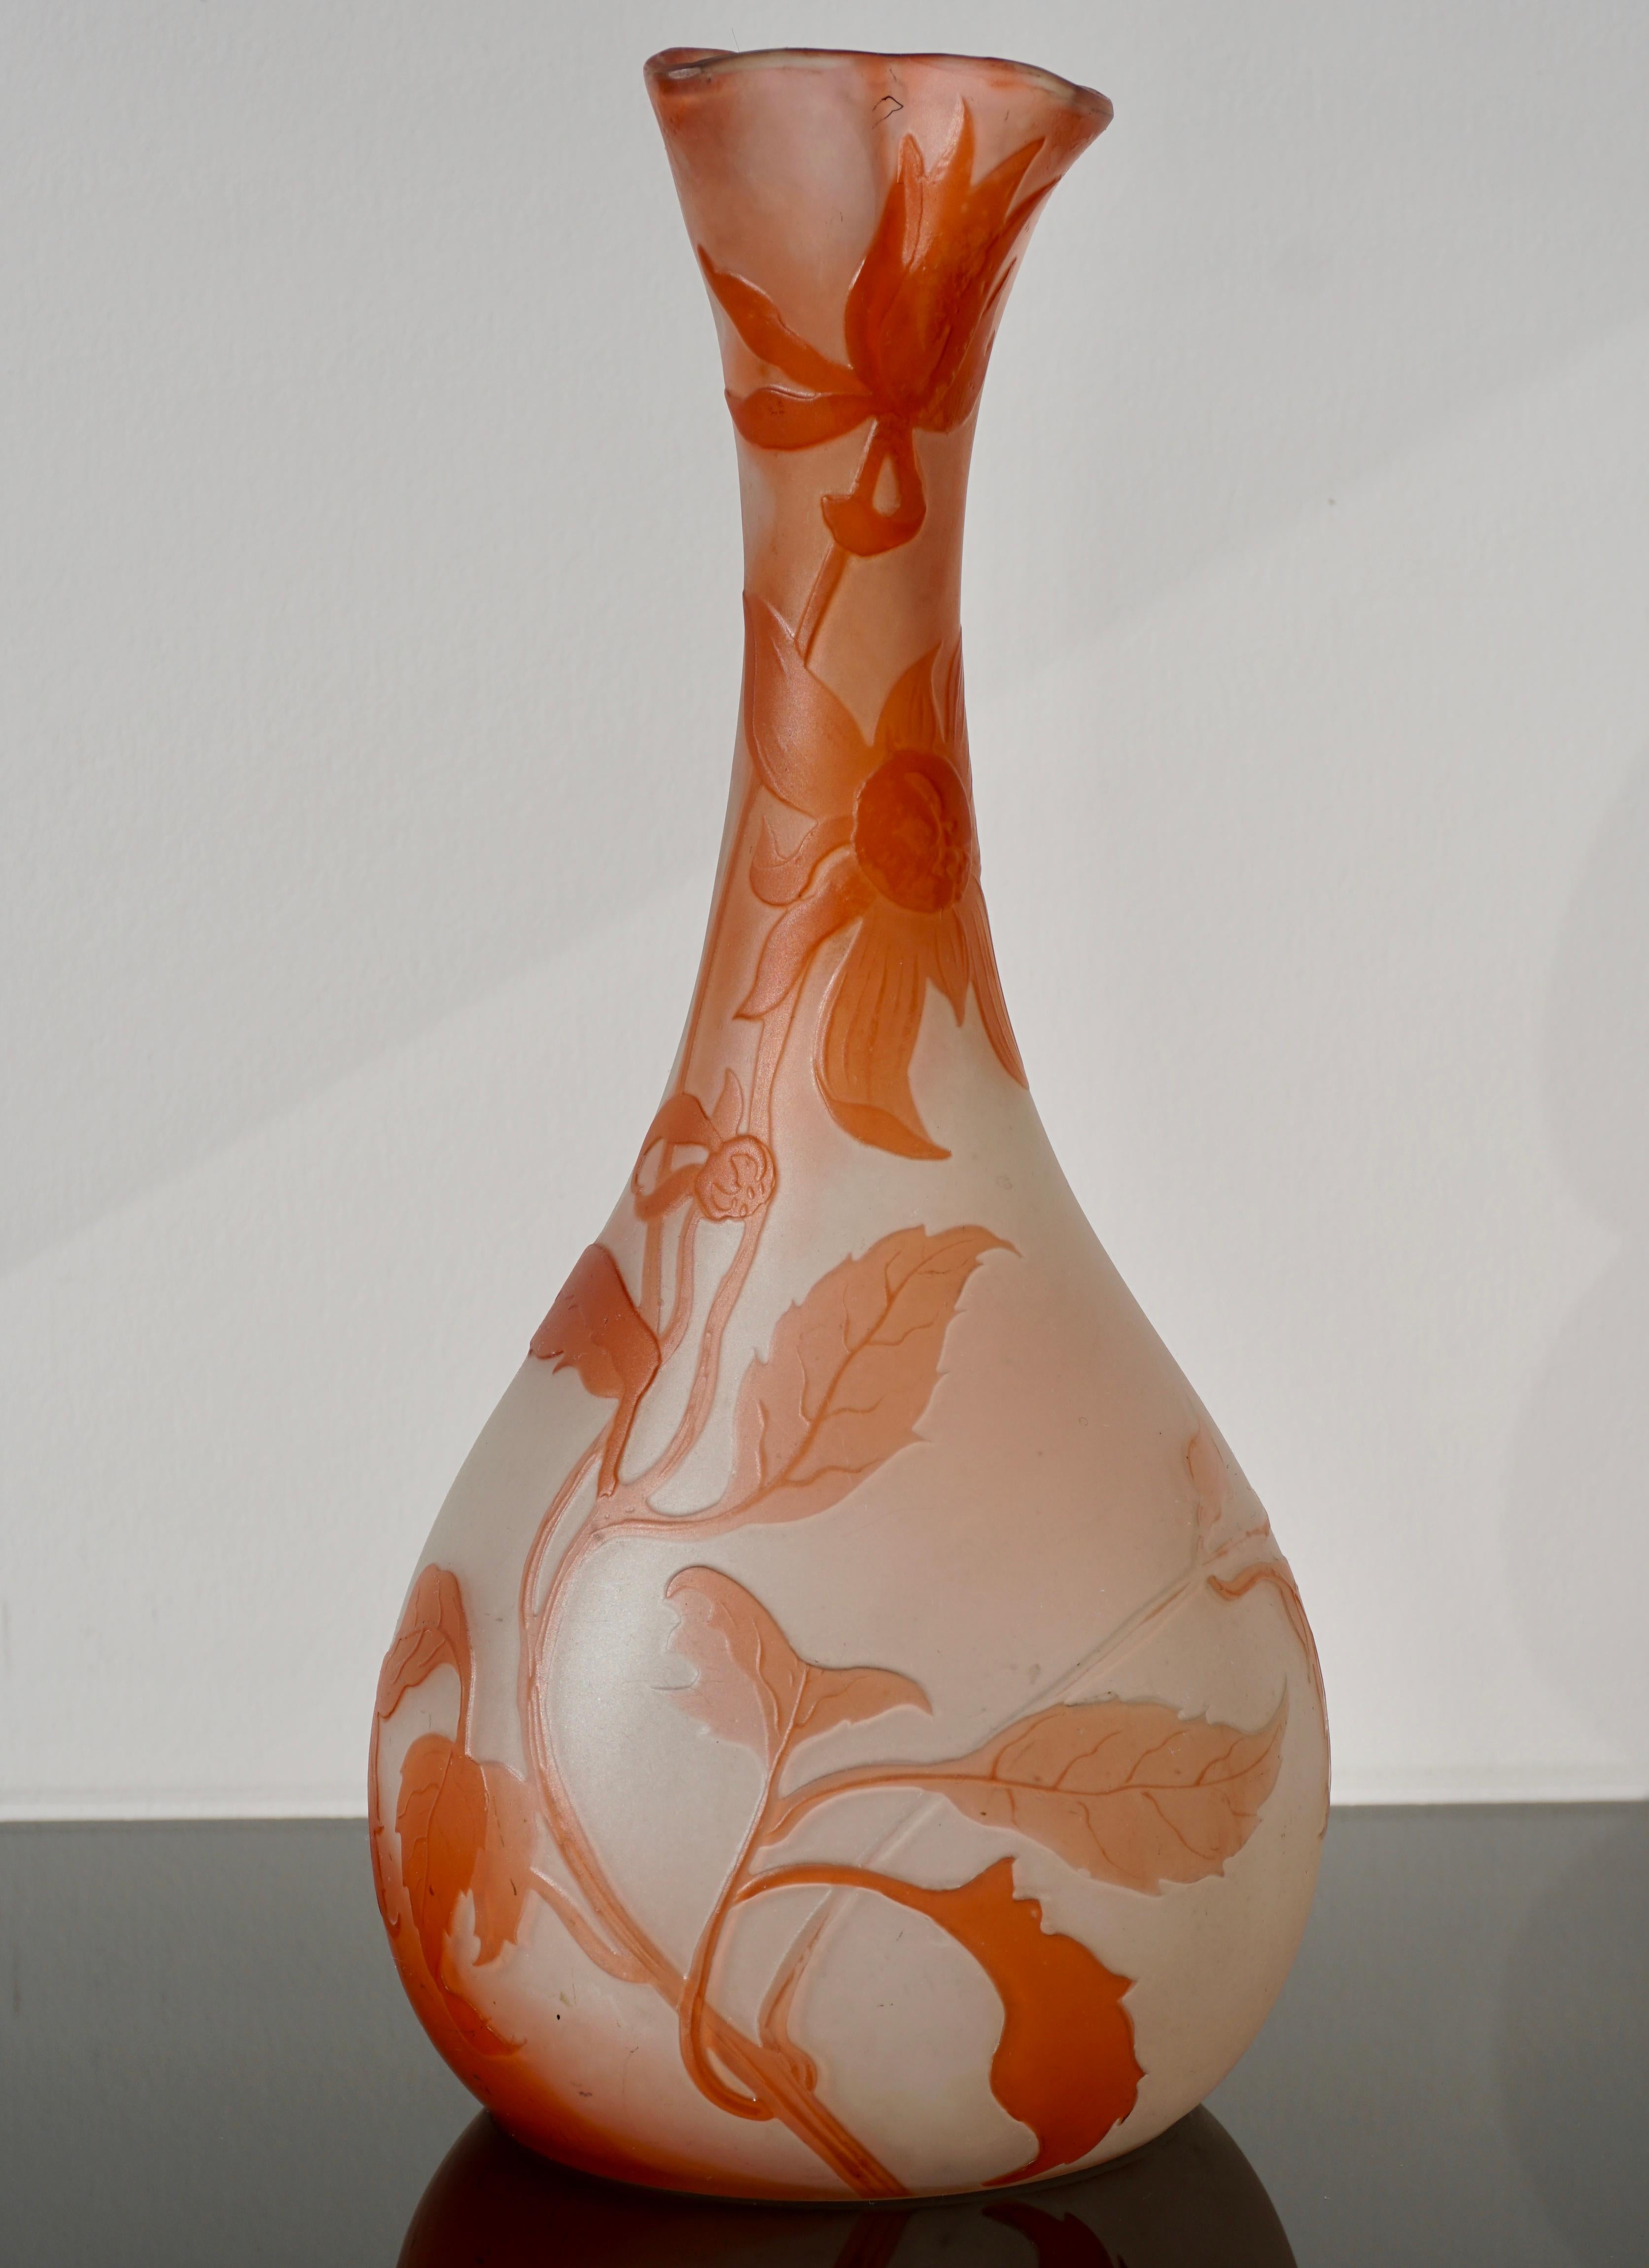 A charming French Art Nouveau, Art Deco acid etched cameo glass vase in reds on frosted background by Emile Galle. Ovoid bulbous form with three pinched opening. Signed in cameo: Galle”.

Measures: Height 9.5 inches
Diameter 5